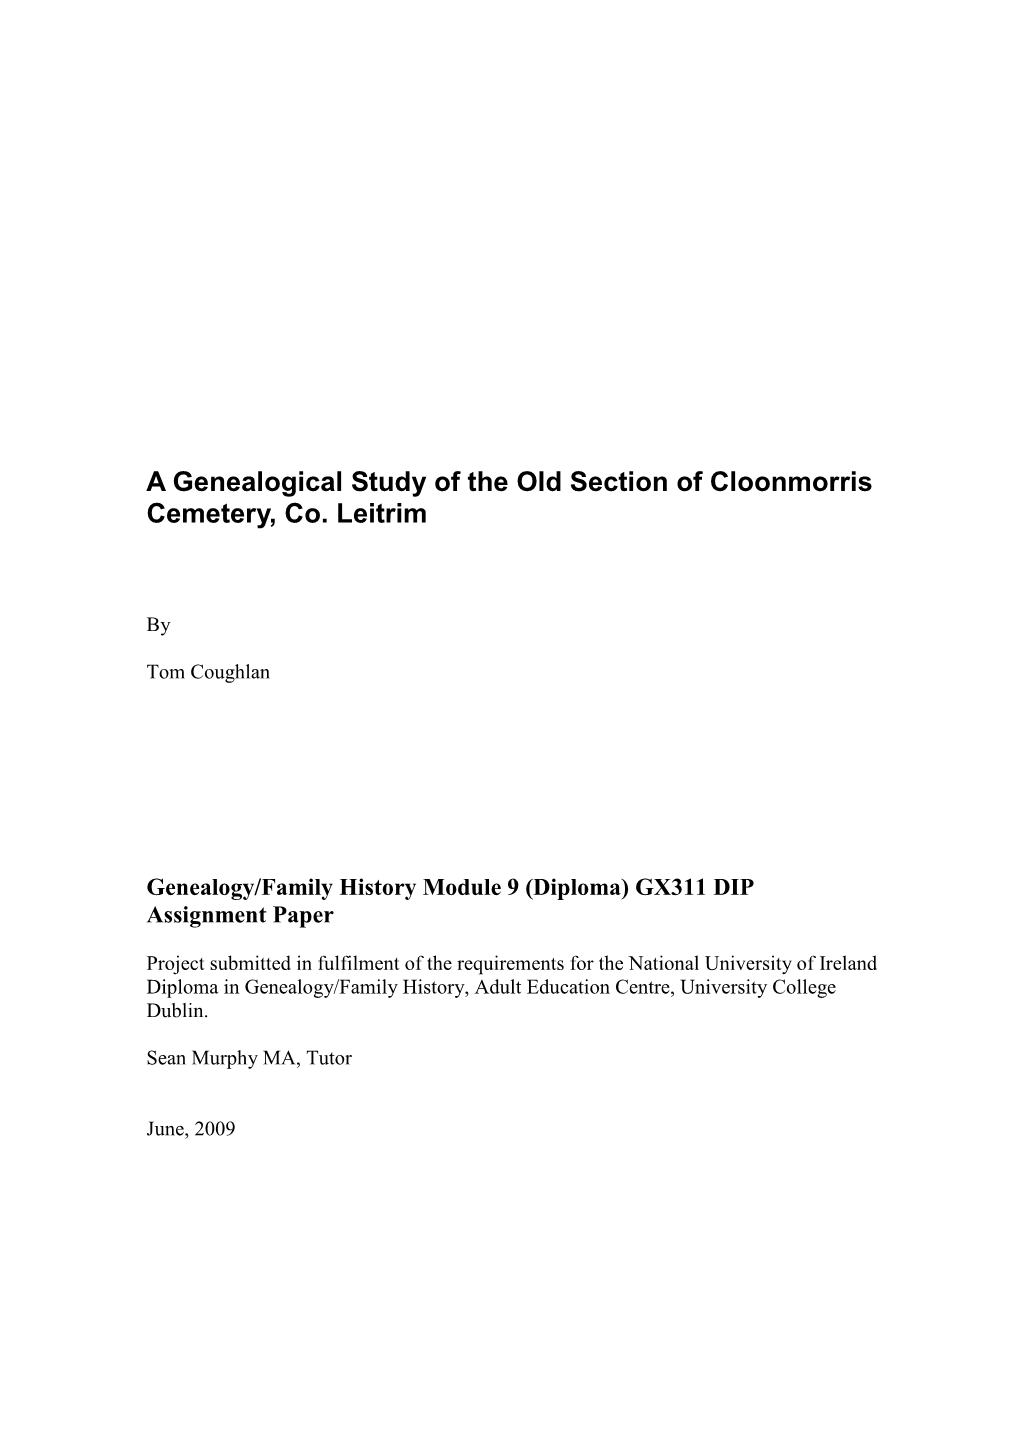 A Genealogical Study of the Old Section of Cloonmorris Cemetery, Co. Leitrim